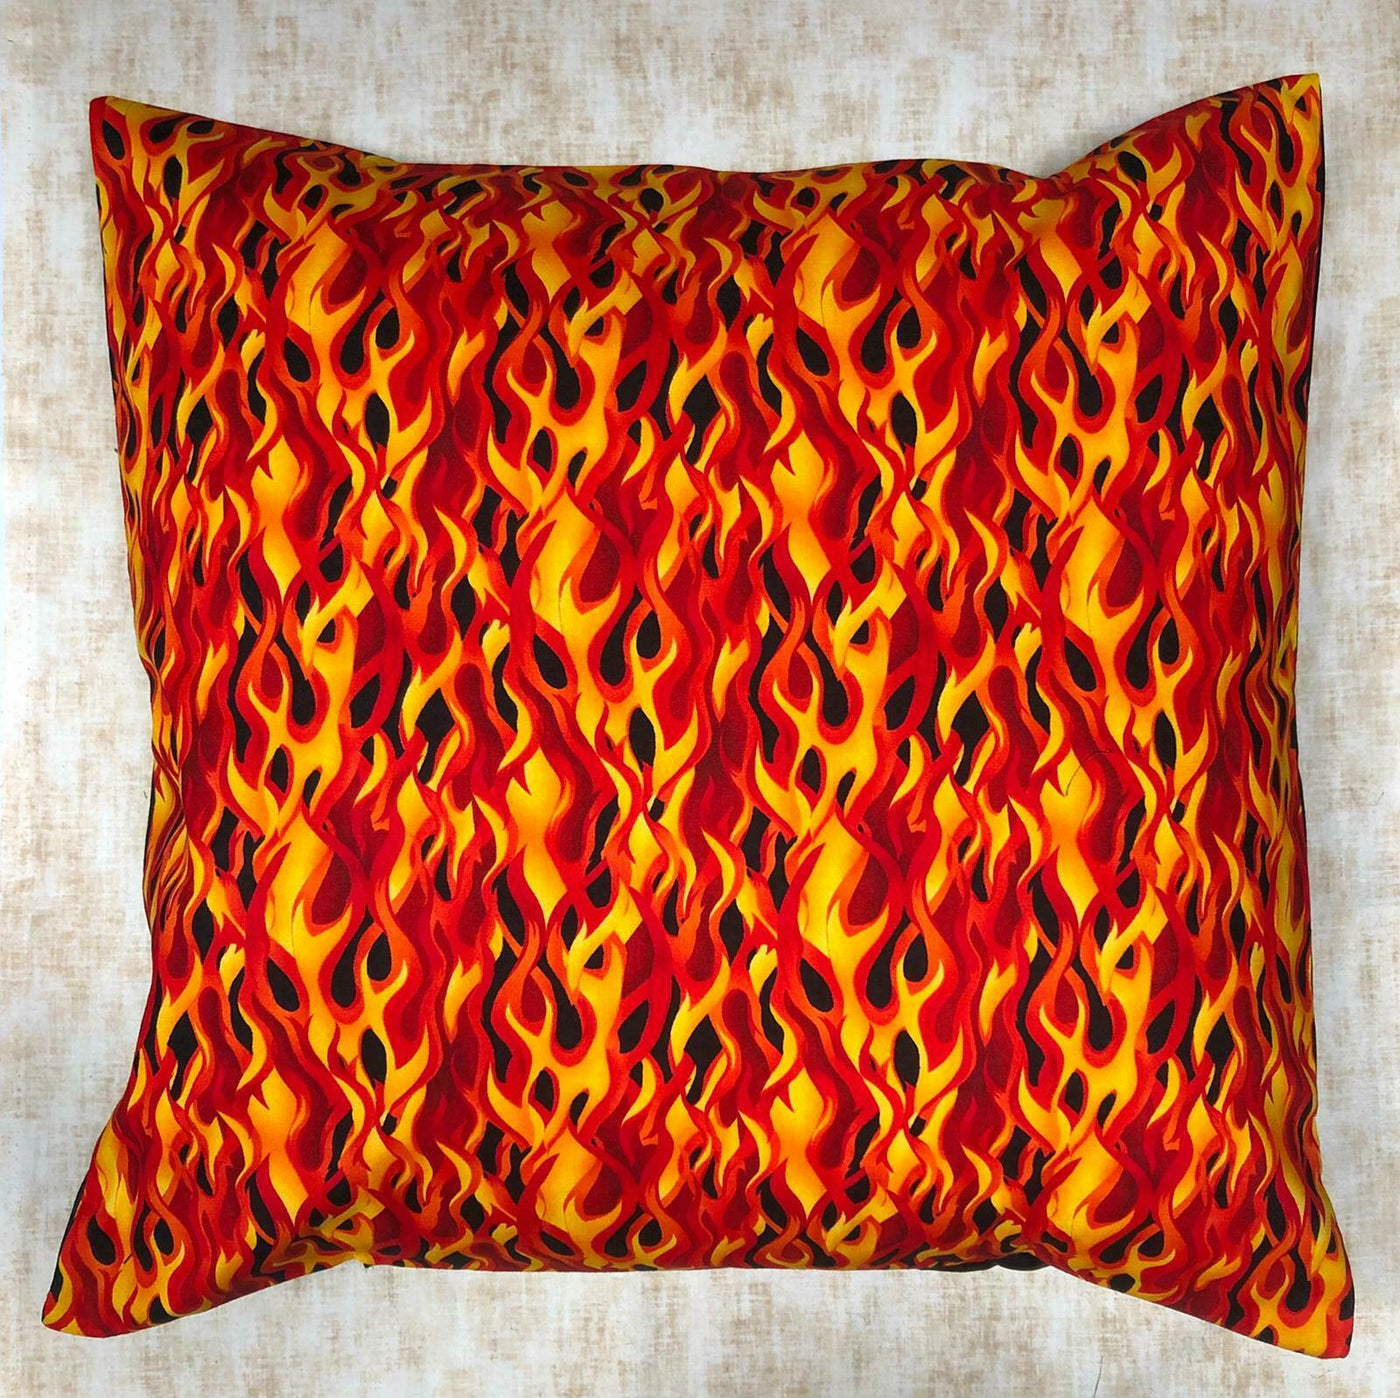 Flames Fire Cushion Cover Case fits 18"x18" Timeless Treasures 100% Cotton